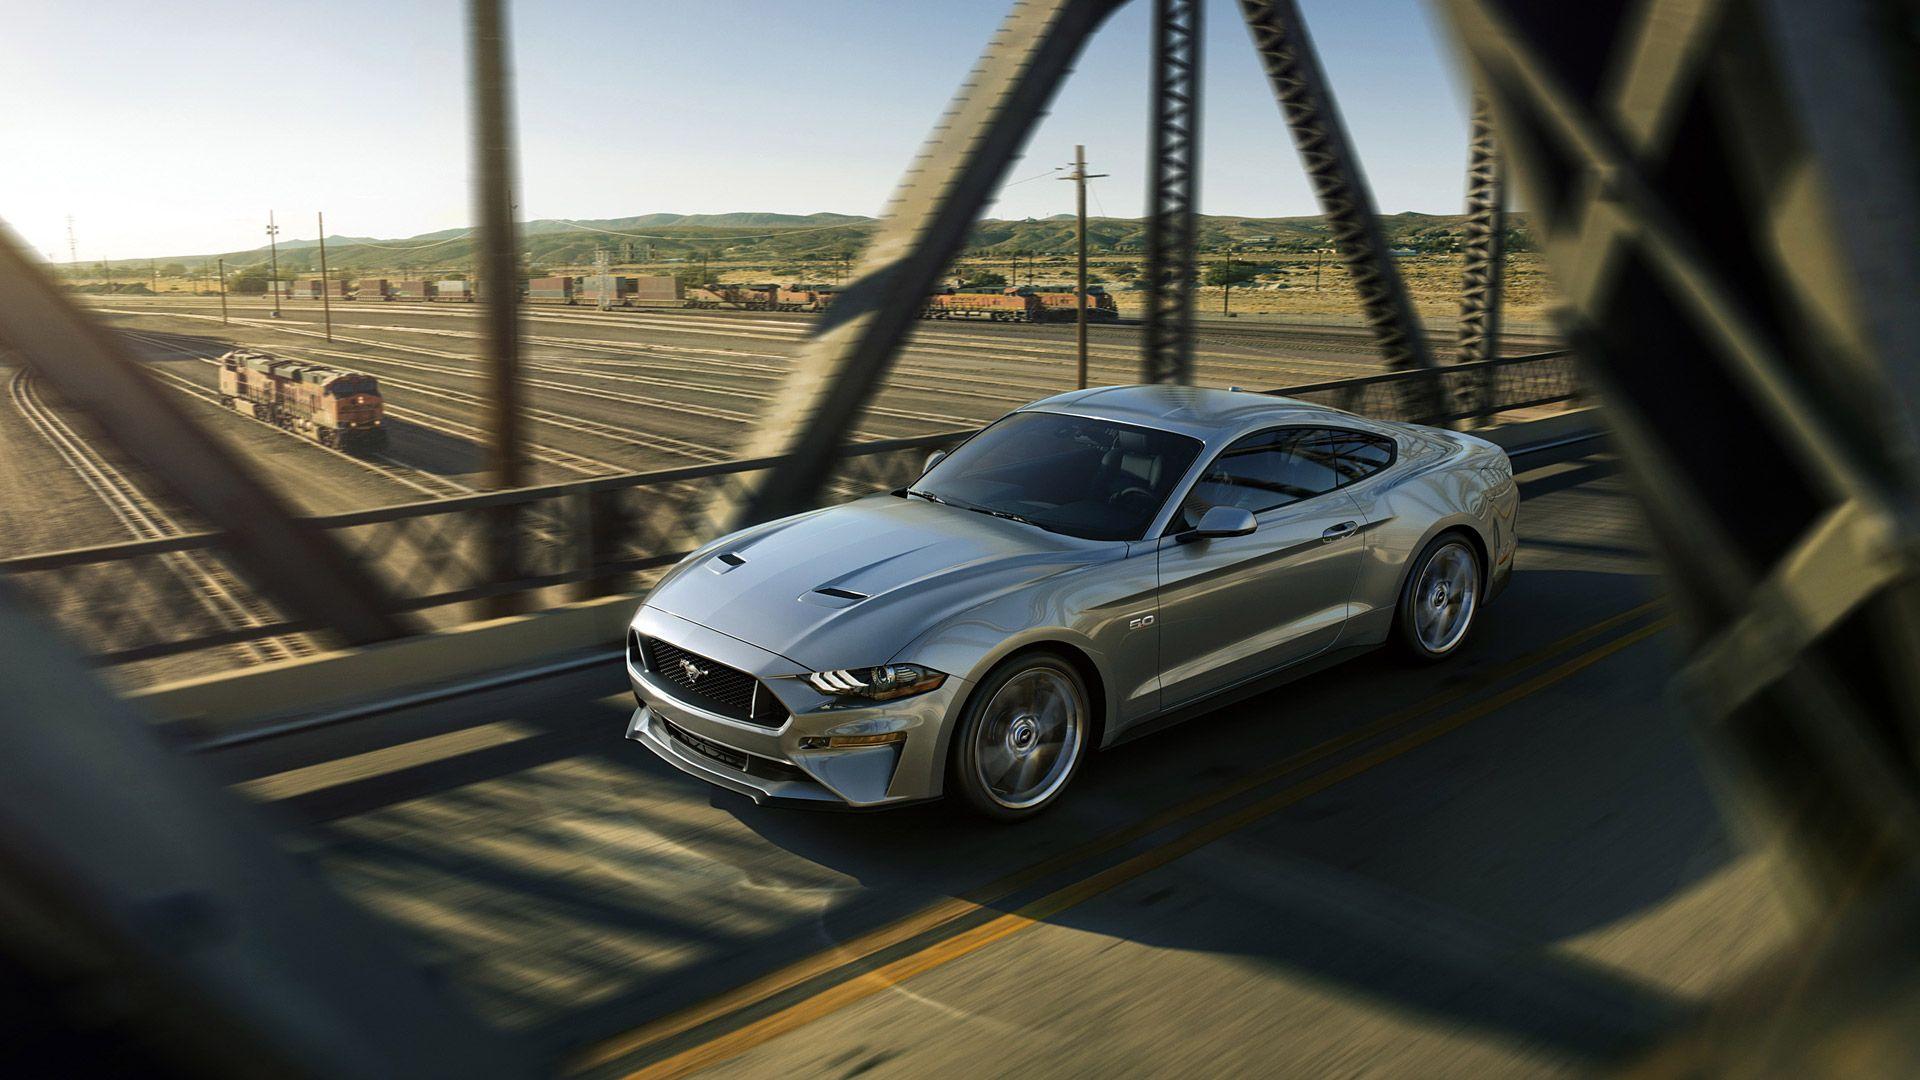 Ford Mustang GT Wallpaper & HD Image